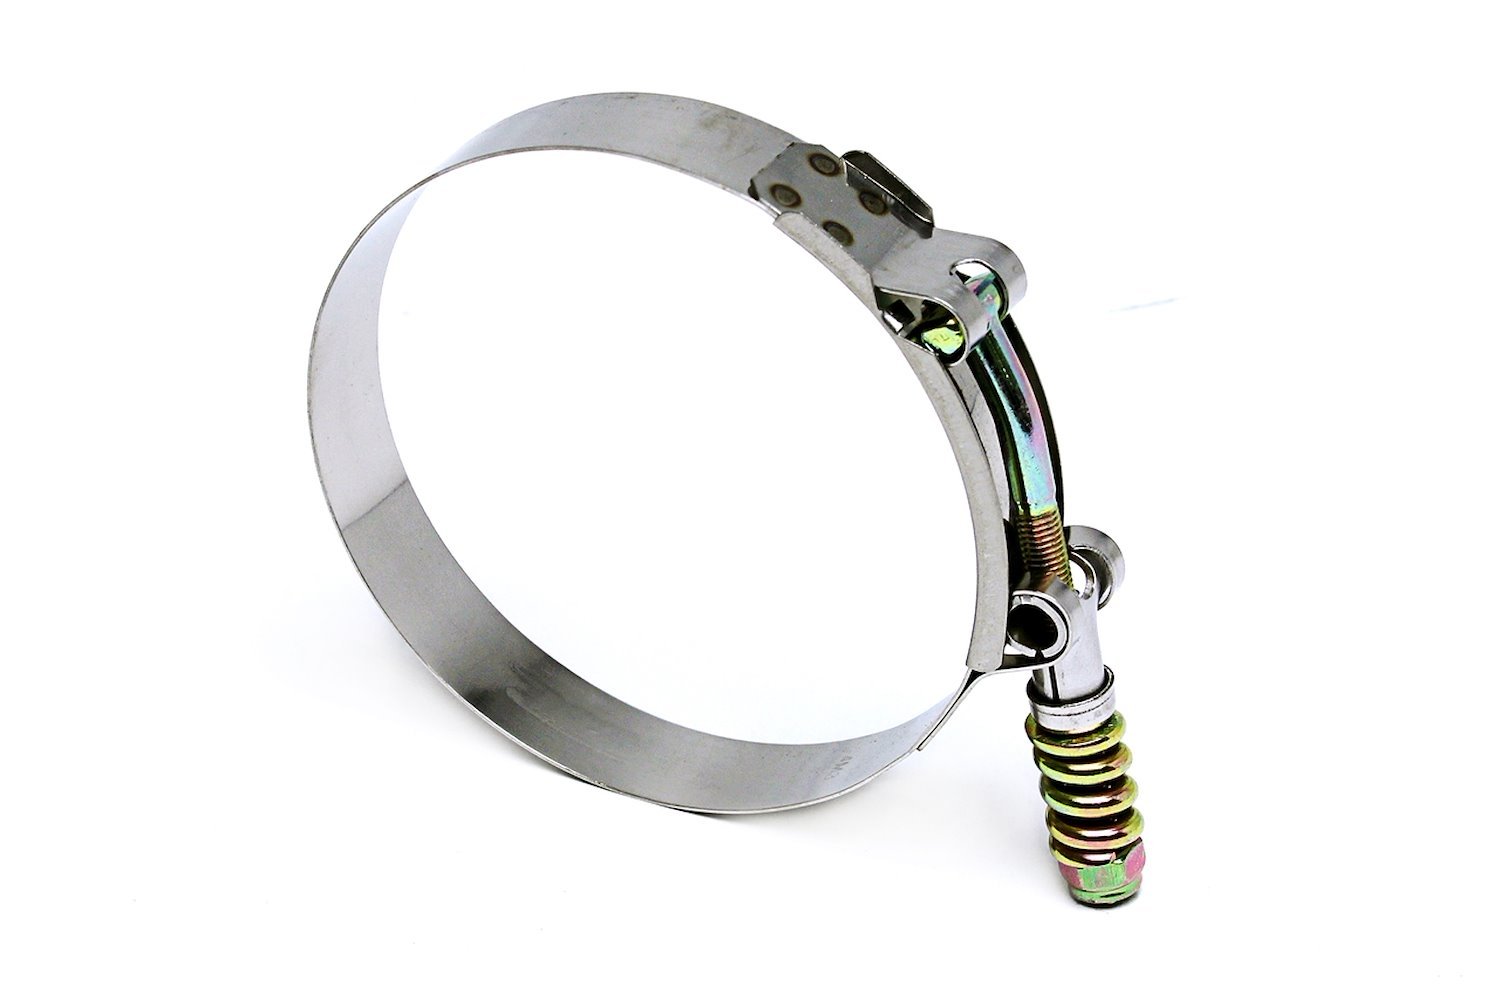 SLTC-675 Stainless Steel Spring Loaded T-Bolt Hose Clamp, Size #188, Range: 6.75 in.-7.06 in.